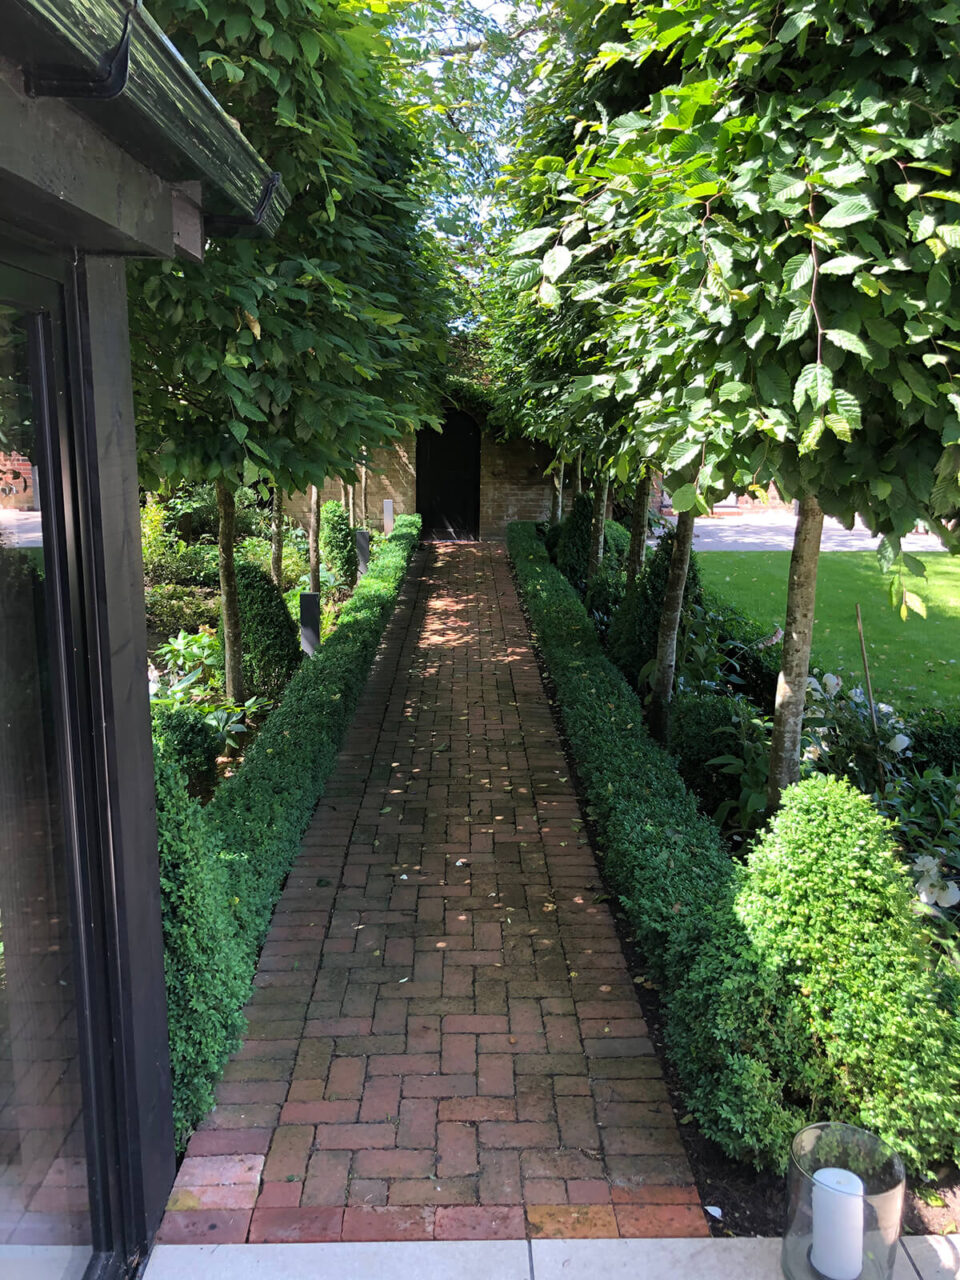 Garden design with paved path through avenue of trees